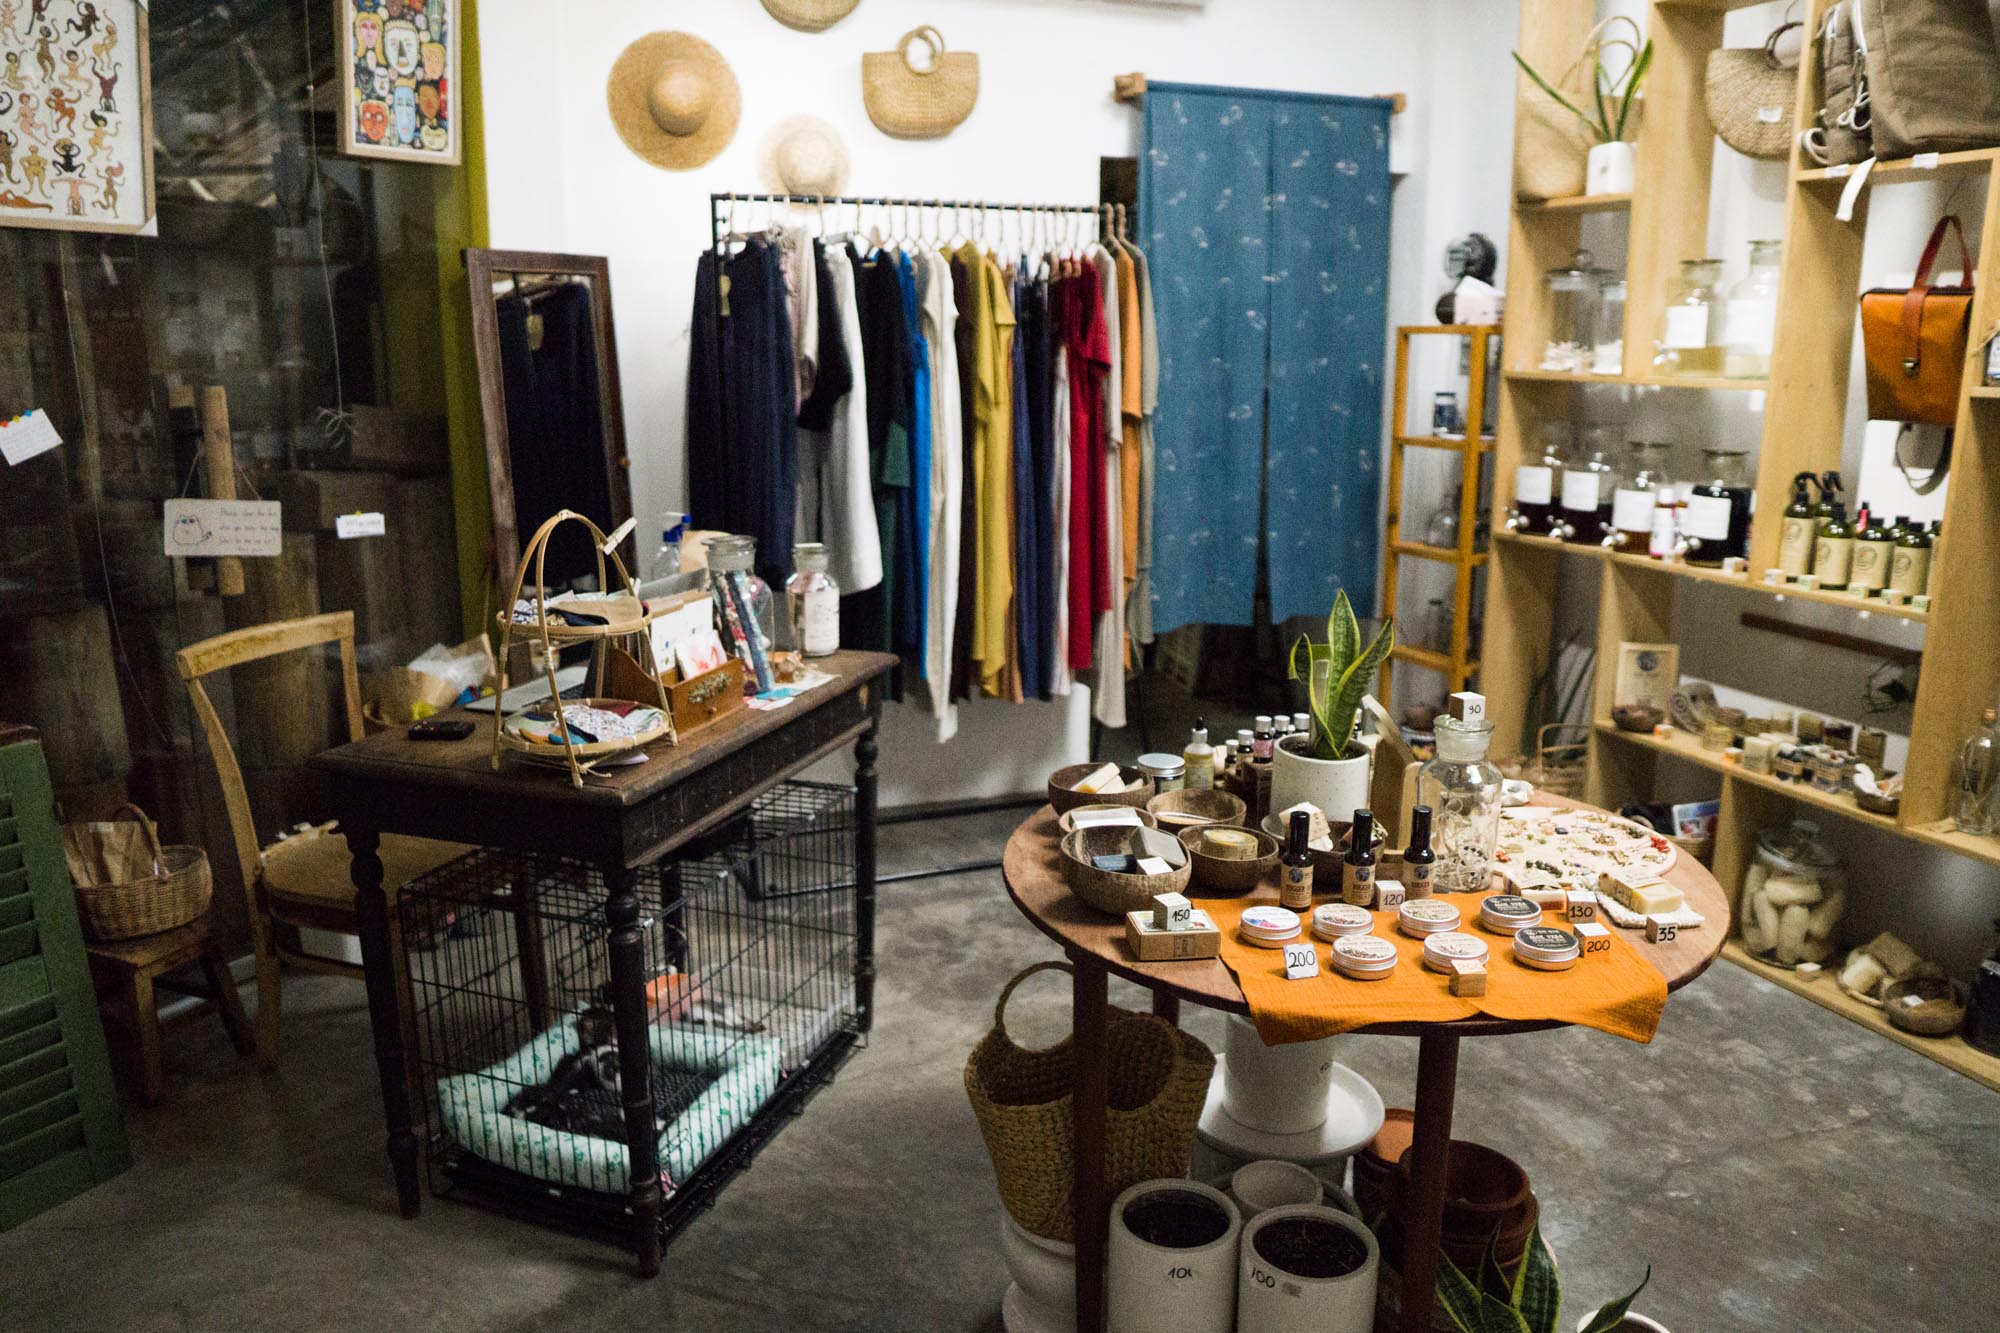 Shop at Purr Nature where you can find eco-friendly products made by local artisans. Photo by Nam Quoc TranShop at Purr Nature where you can find eco-friendly products made by local artisans. Photo by Nam Quoc Tran